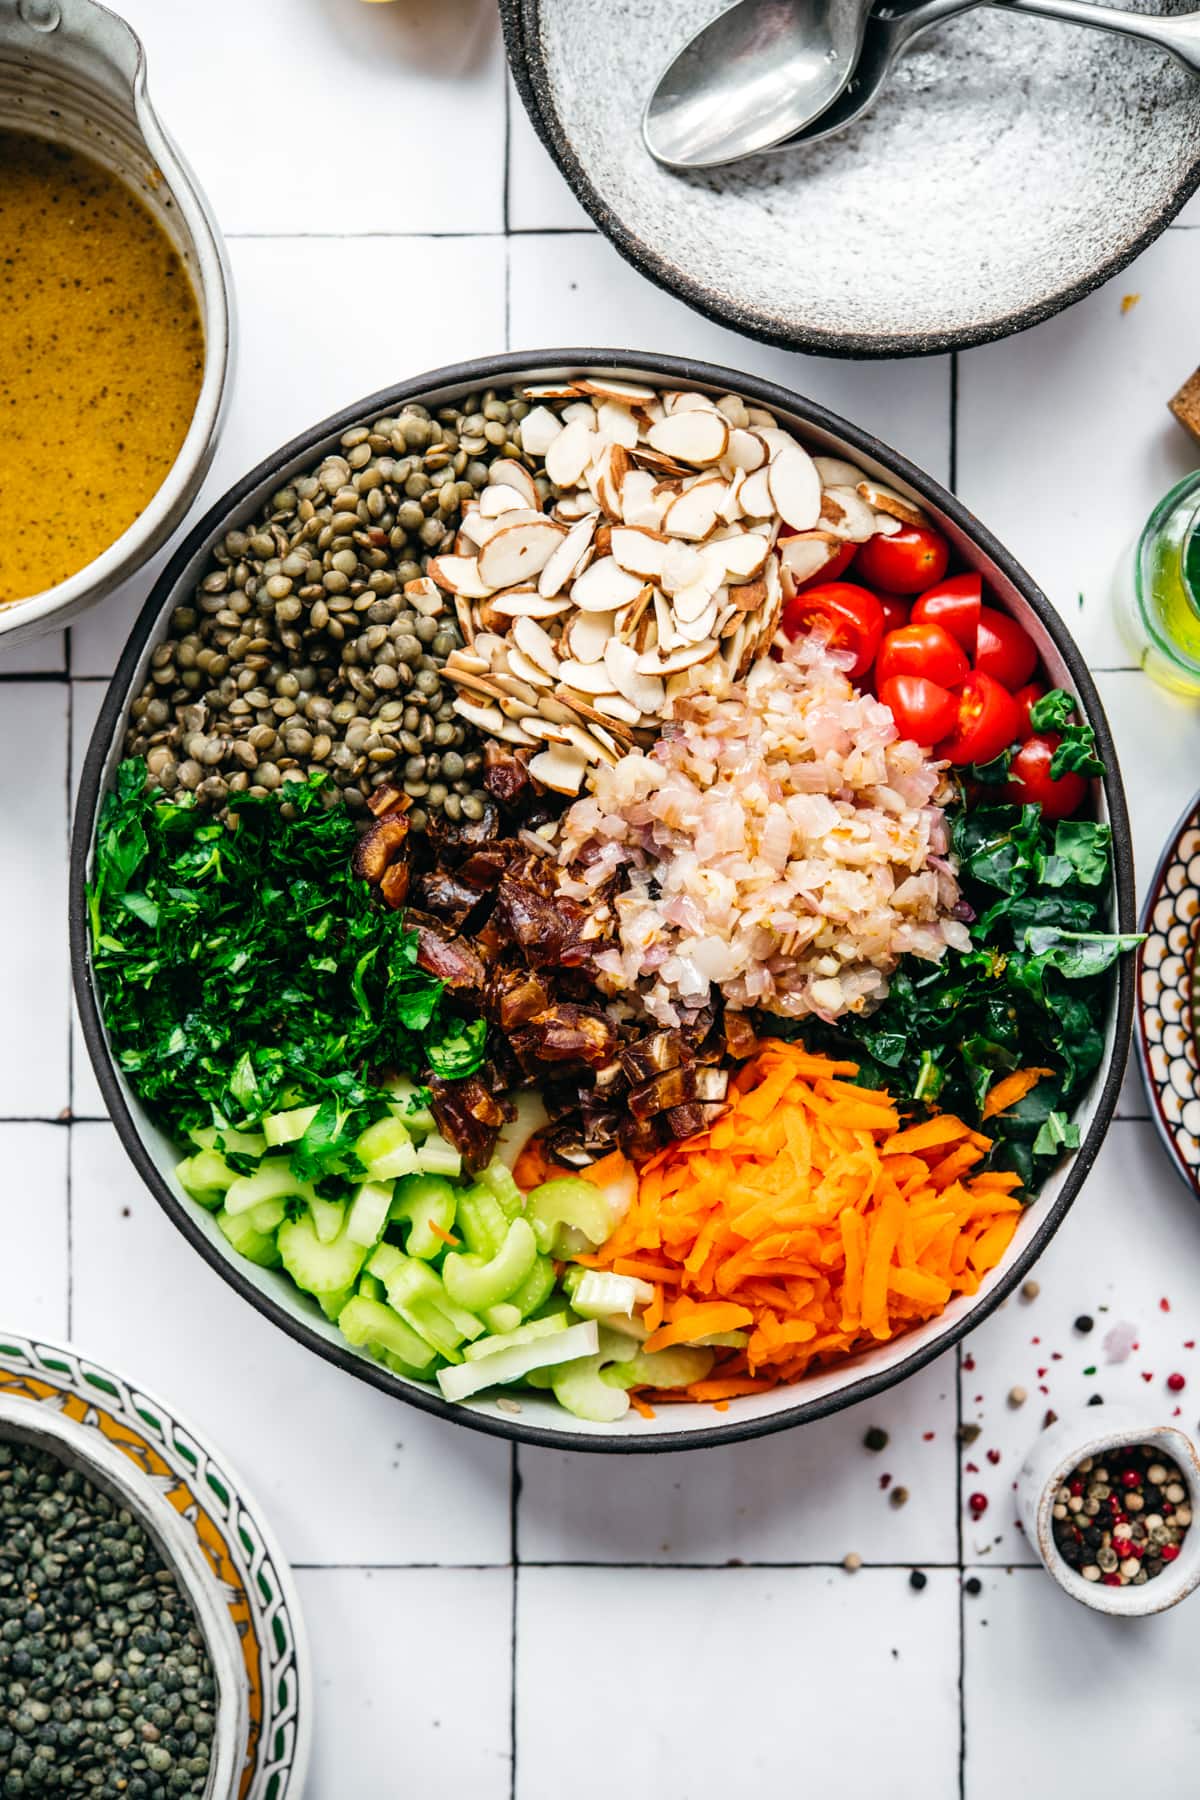 overhead view of vegan french lentil salad in a large bowl with serving spoon on white tile background.